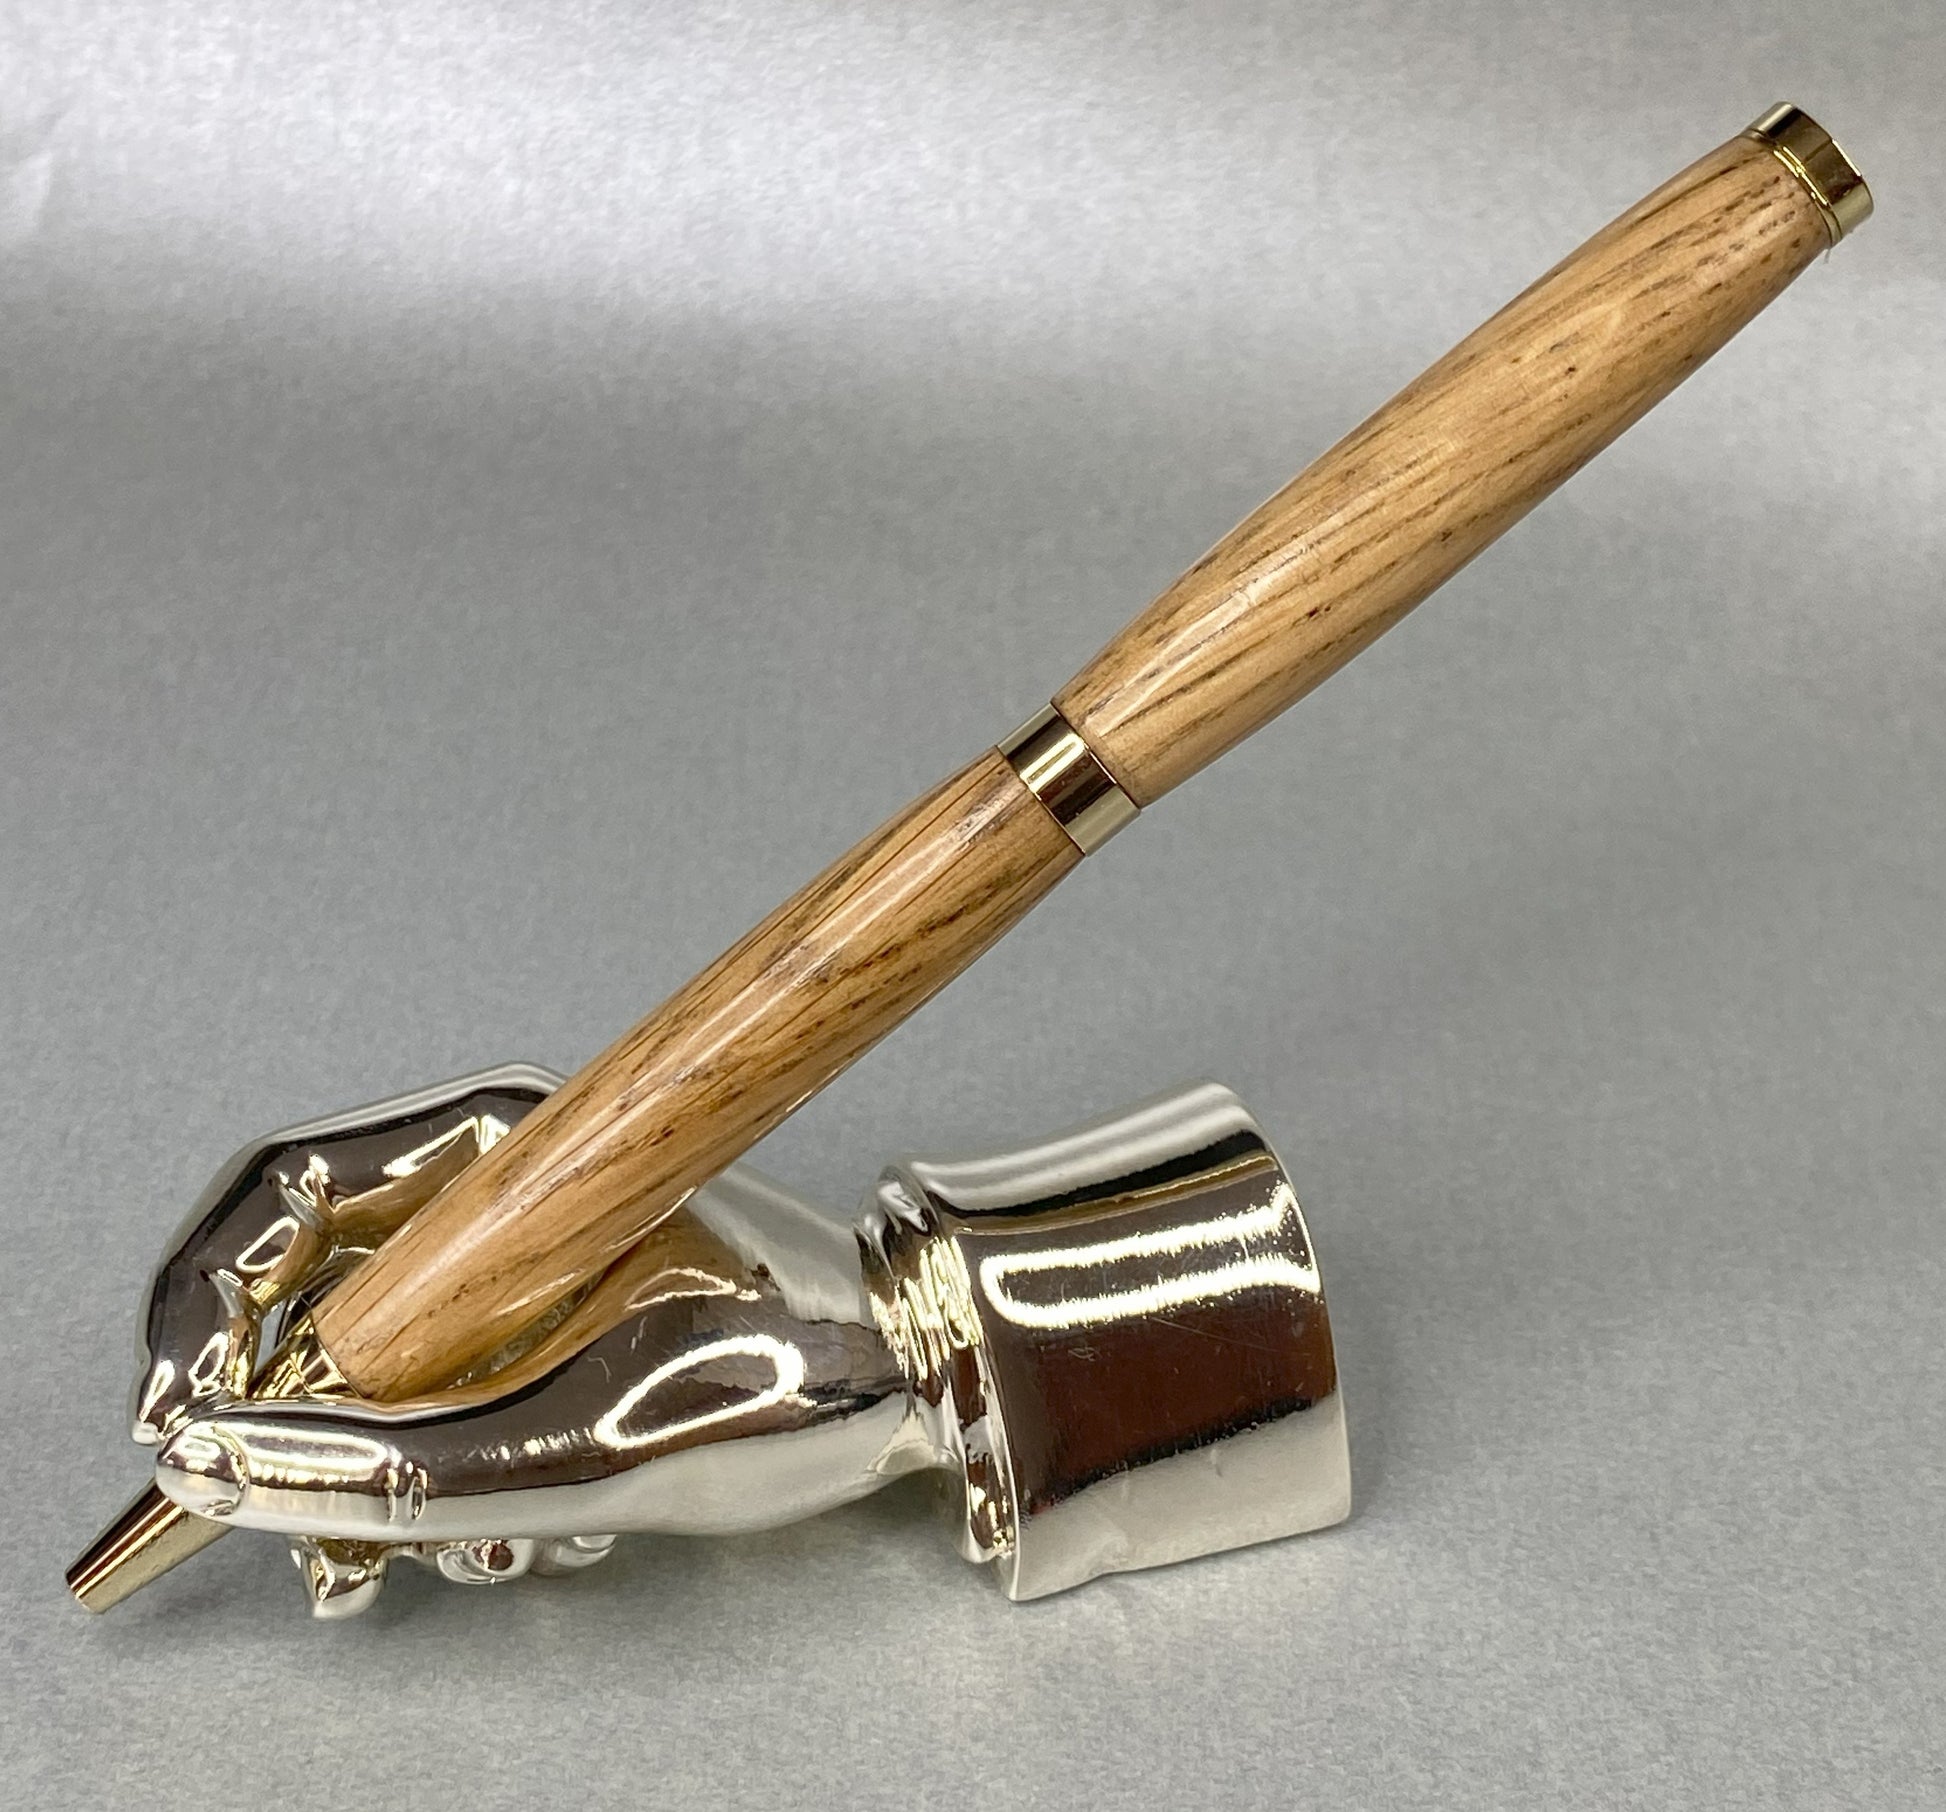 English Oak wood pen standing on a left handed chrome hand in gold plated fittings showing the back of the pen